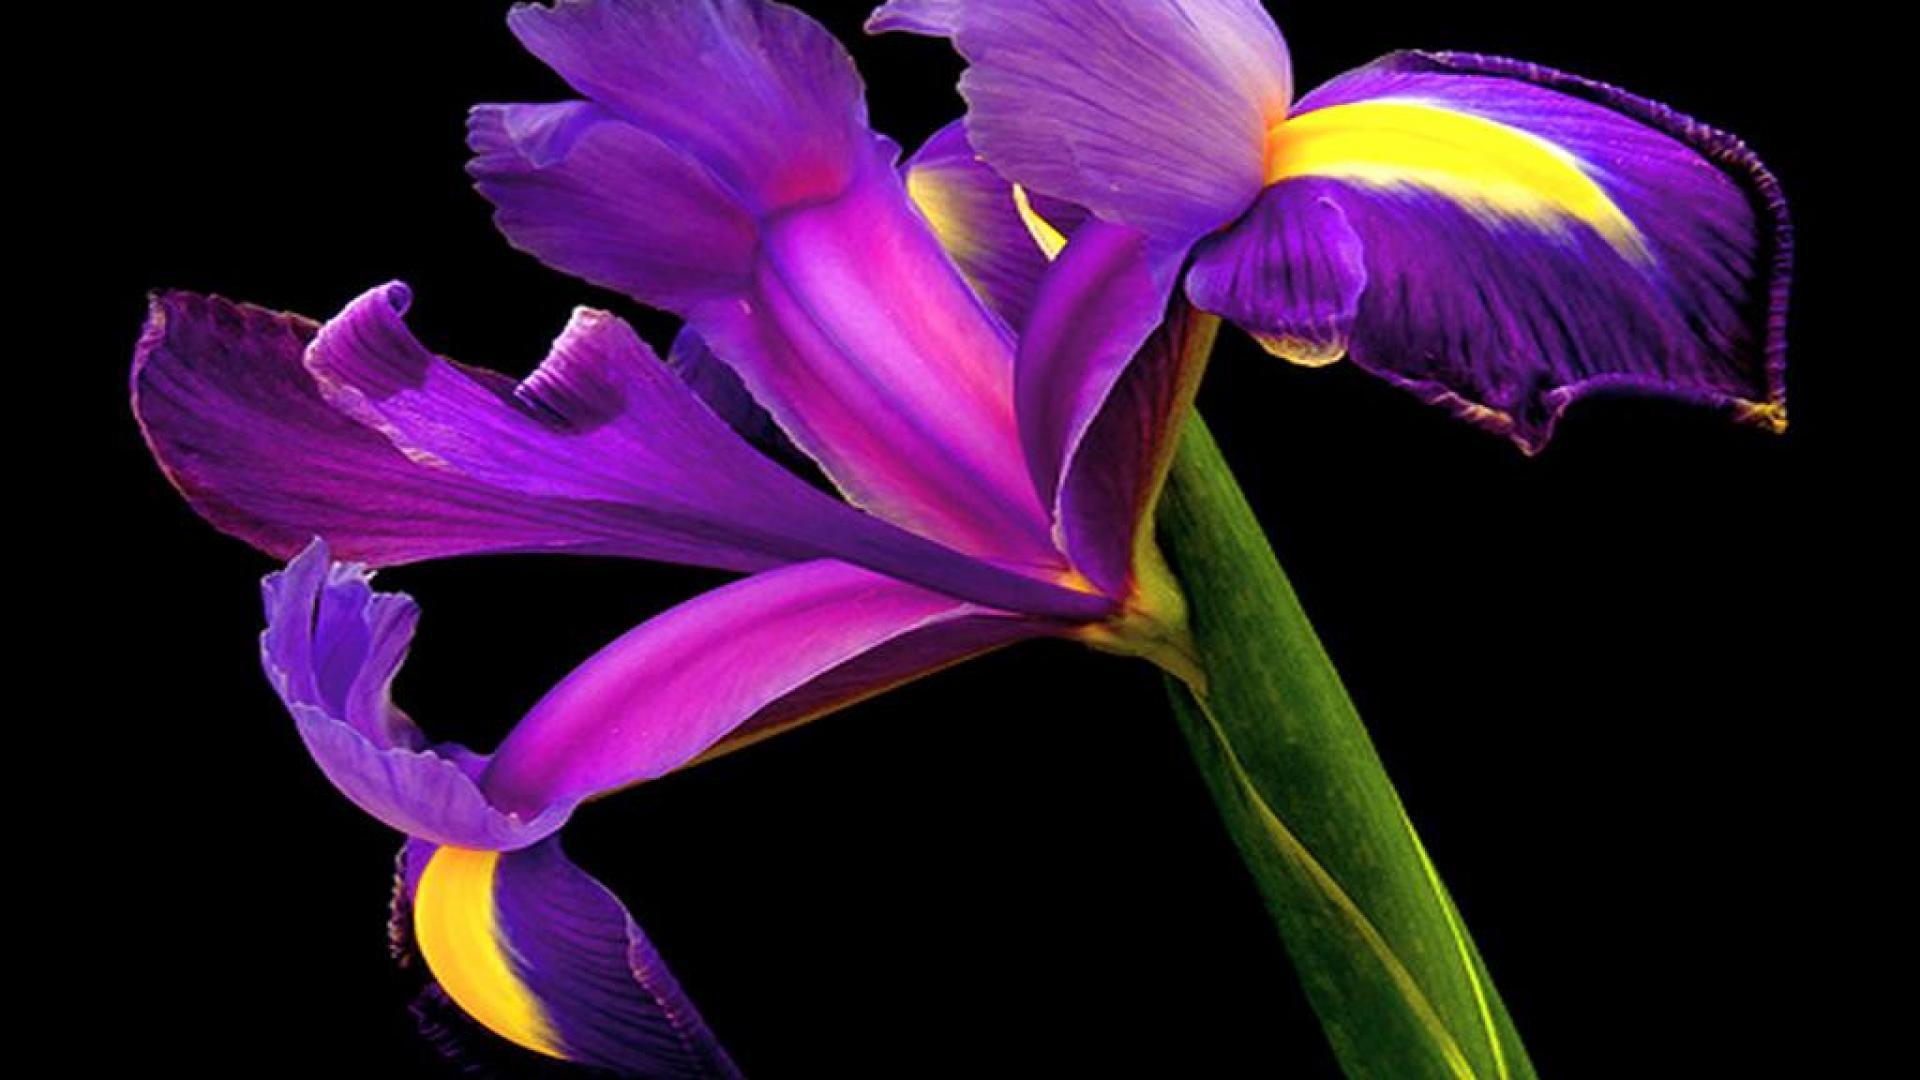 Download Iris on black background wallpaper and image wallpaper